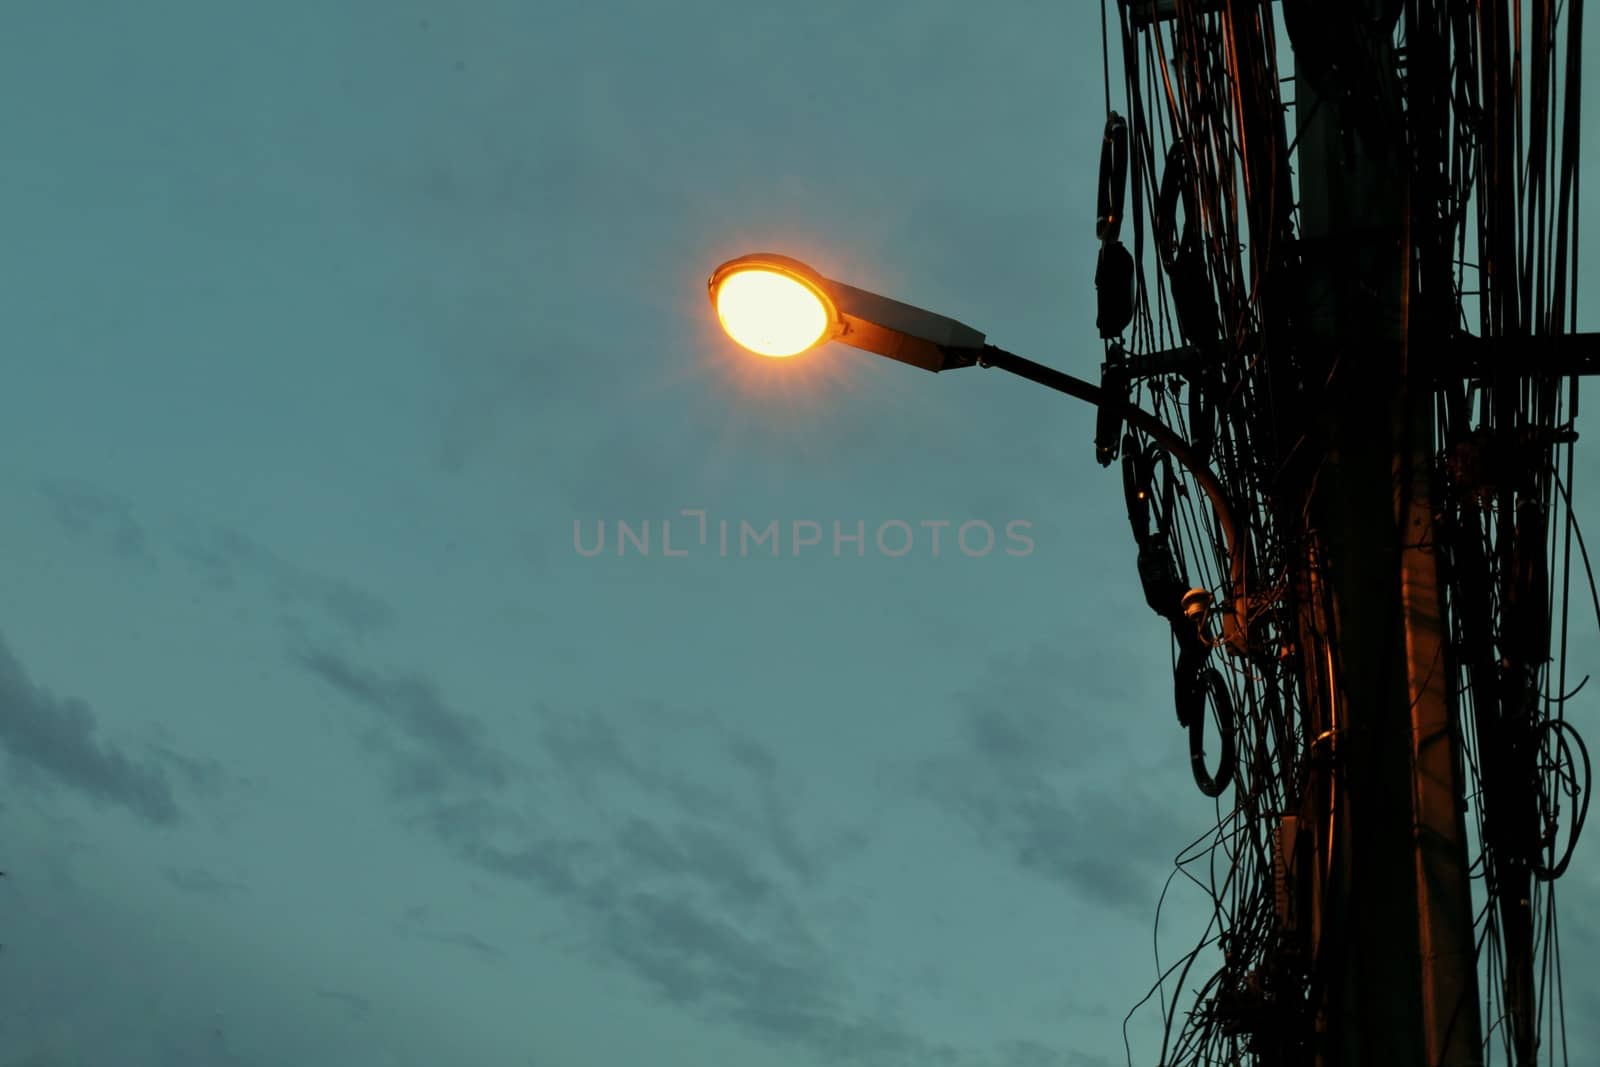 Street lights mounted on poles at evening time by cgdeaw